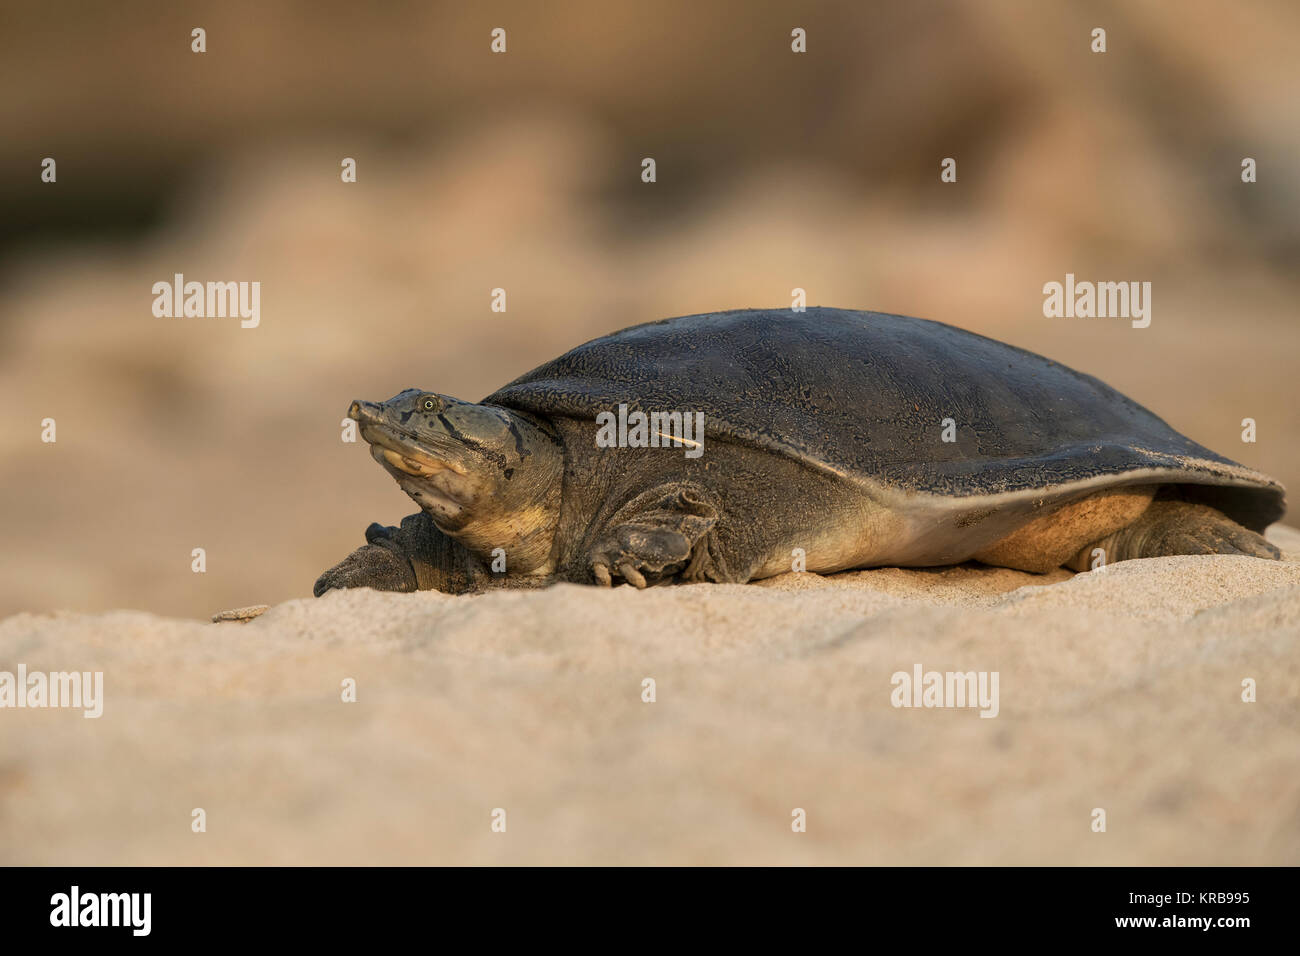 The image of Indian softshell turtle (Nilssonia gangetica), or Ganges softshell turtle in Kotdwar, uttrakhand, India Stock Photo